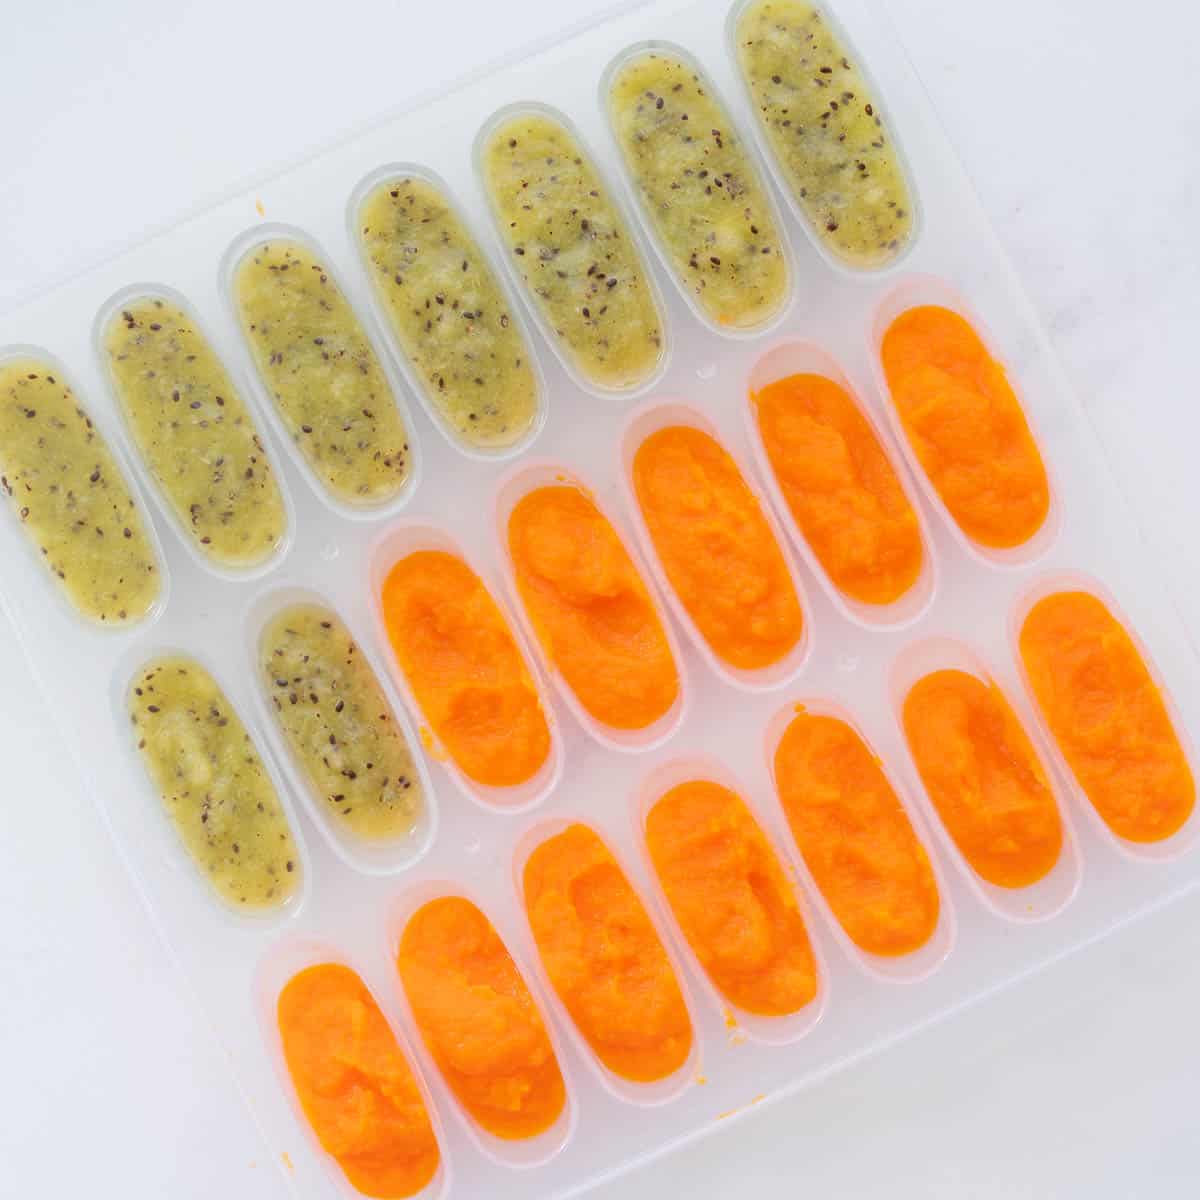 A baby food tray filled with both carrot and kiwi puree.